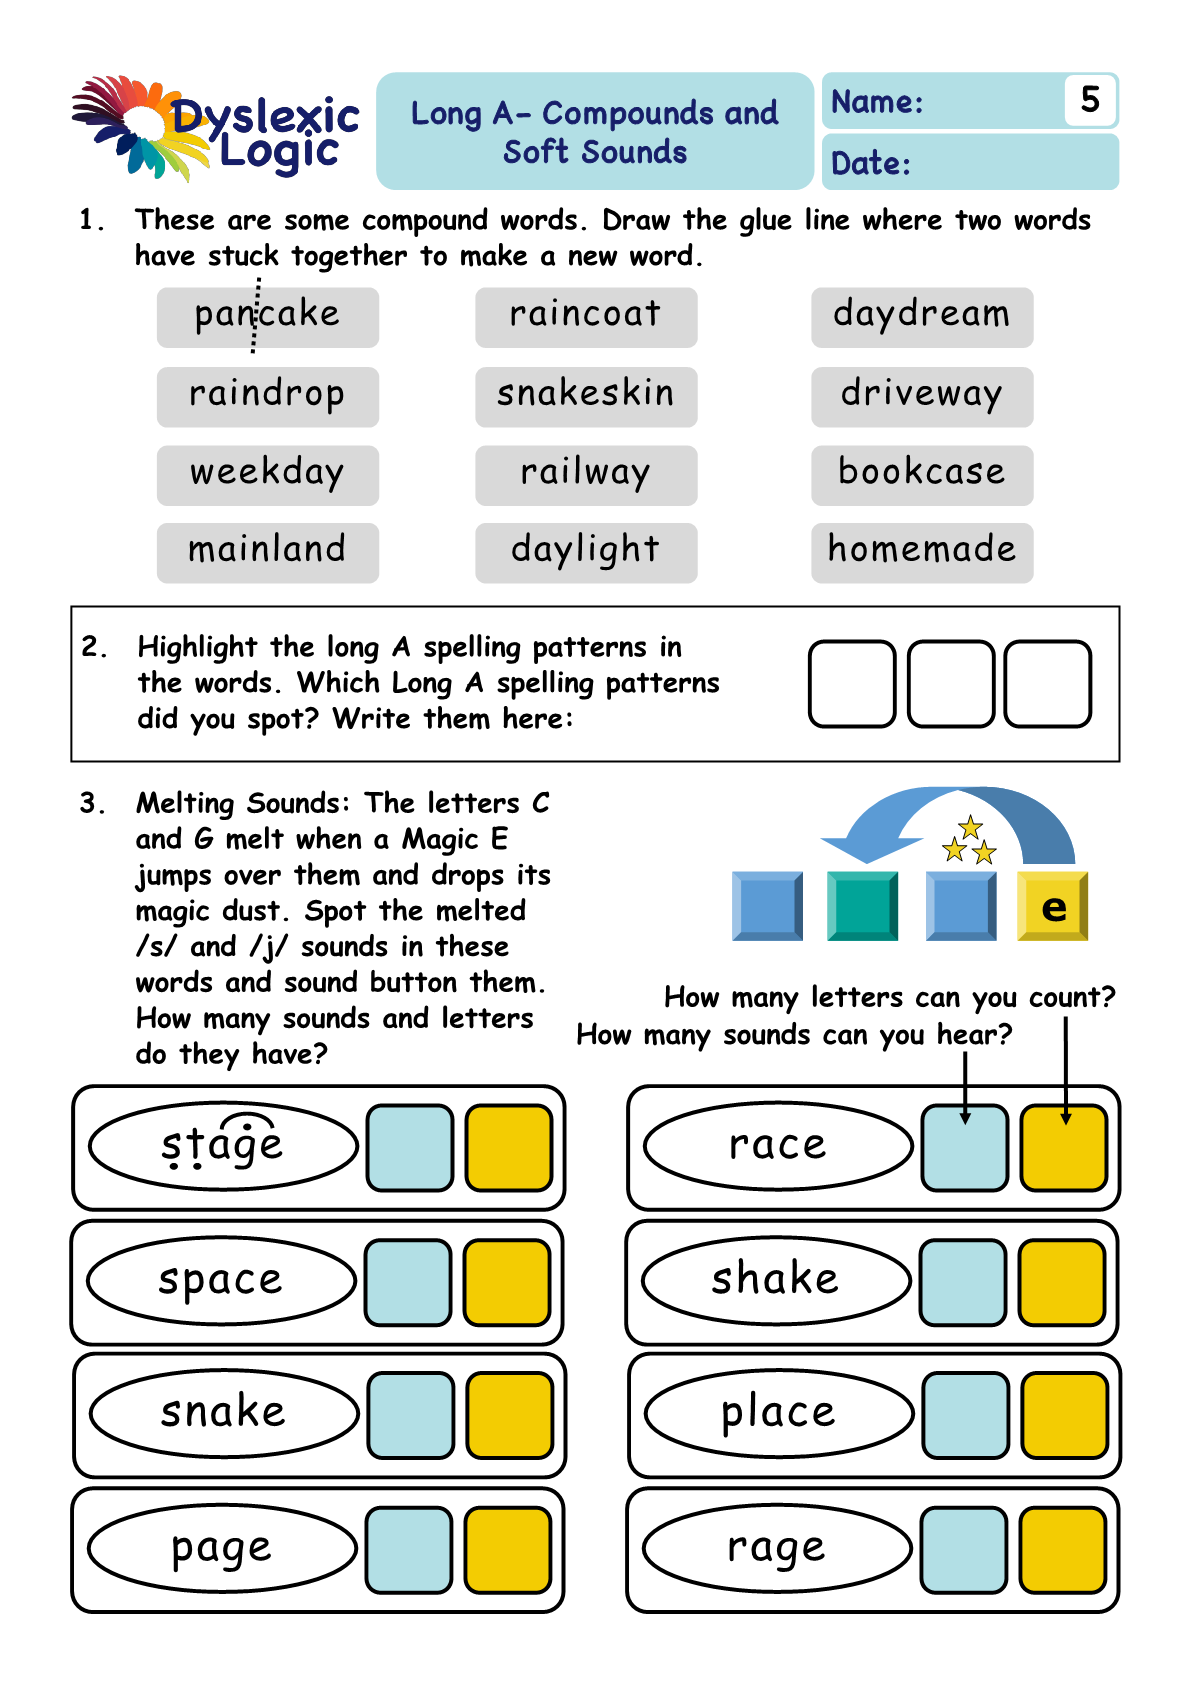 printable-phonics-support-resources-dyslexic-logic-free-printable